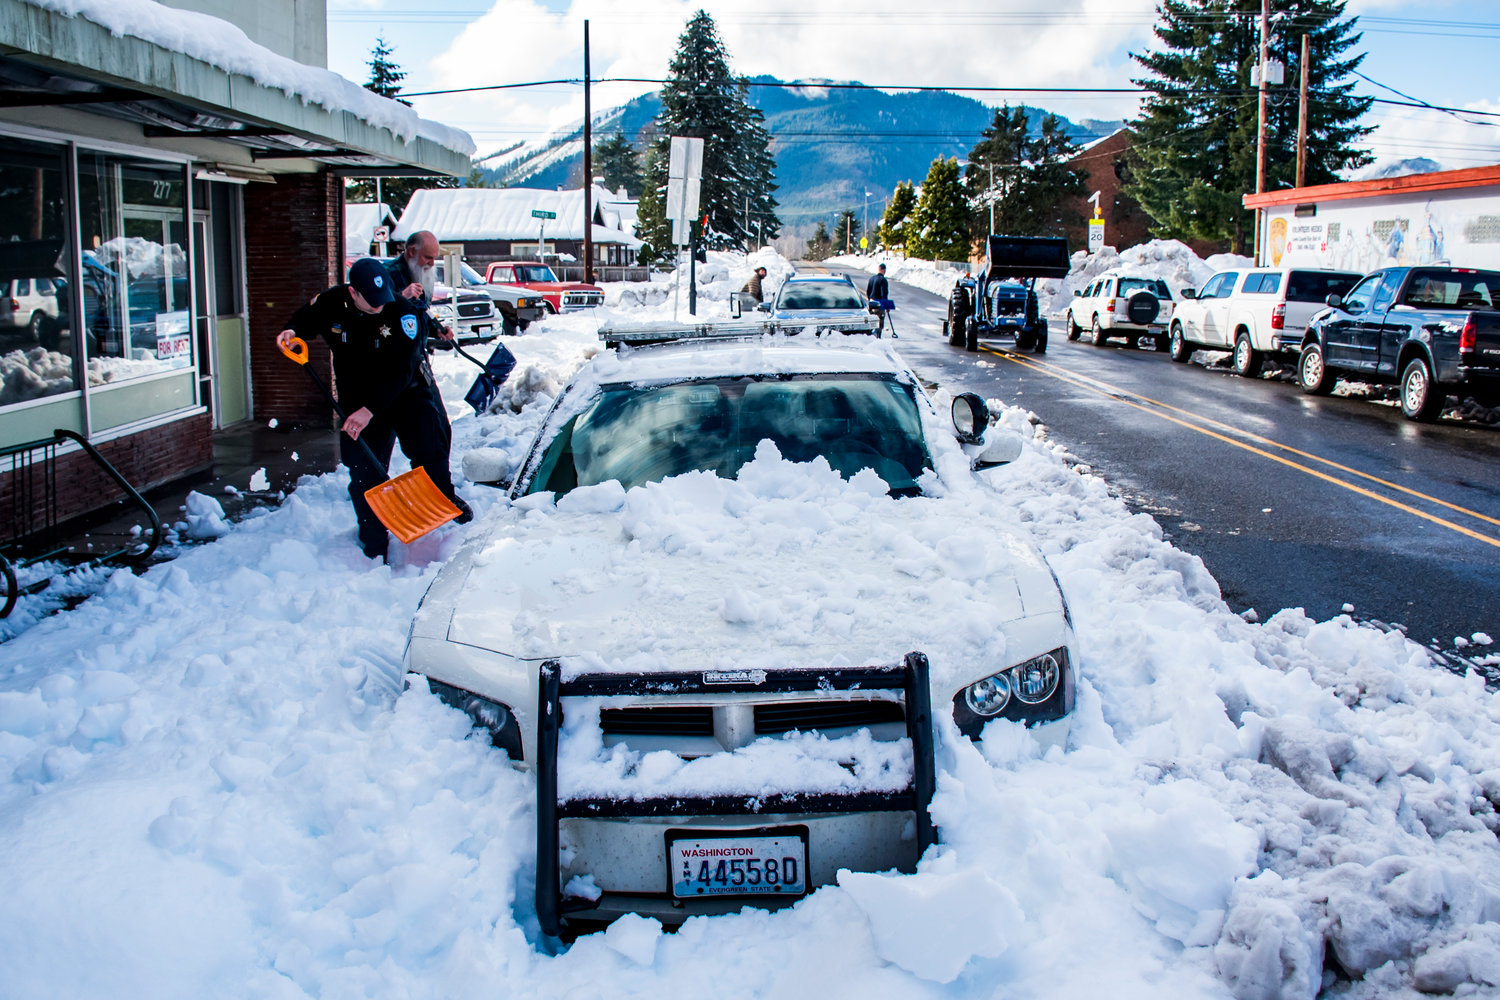 Community members help Chief Roger Morningstar remove his police cruiser from the snow Wednesday afternoon in Morton.